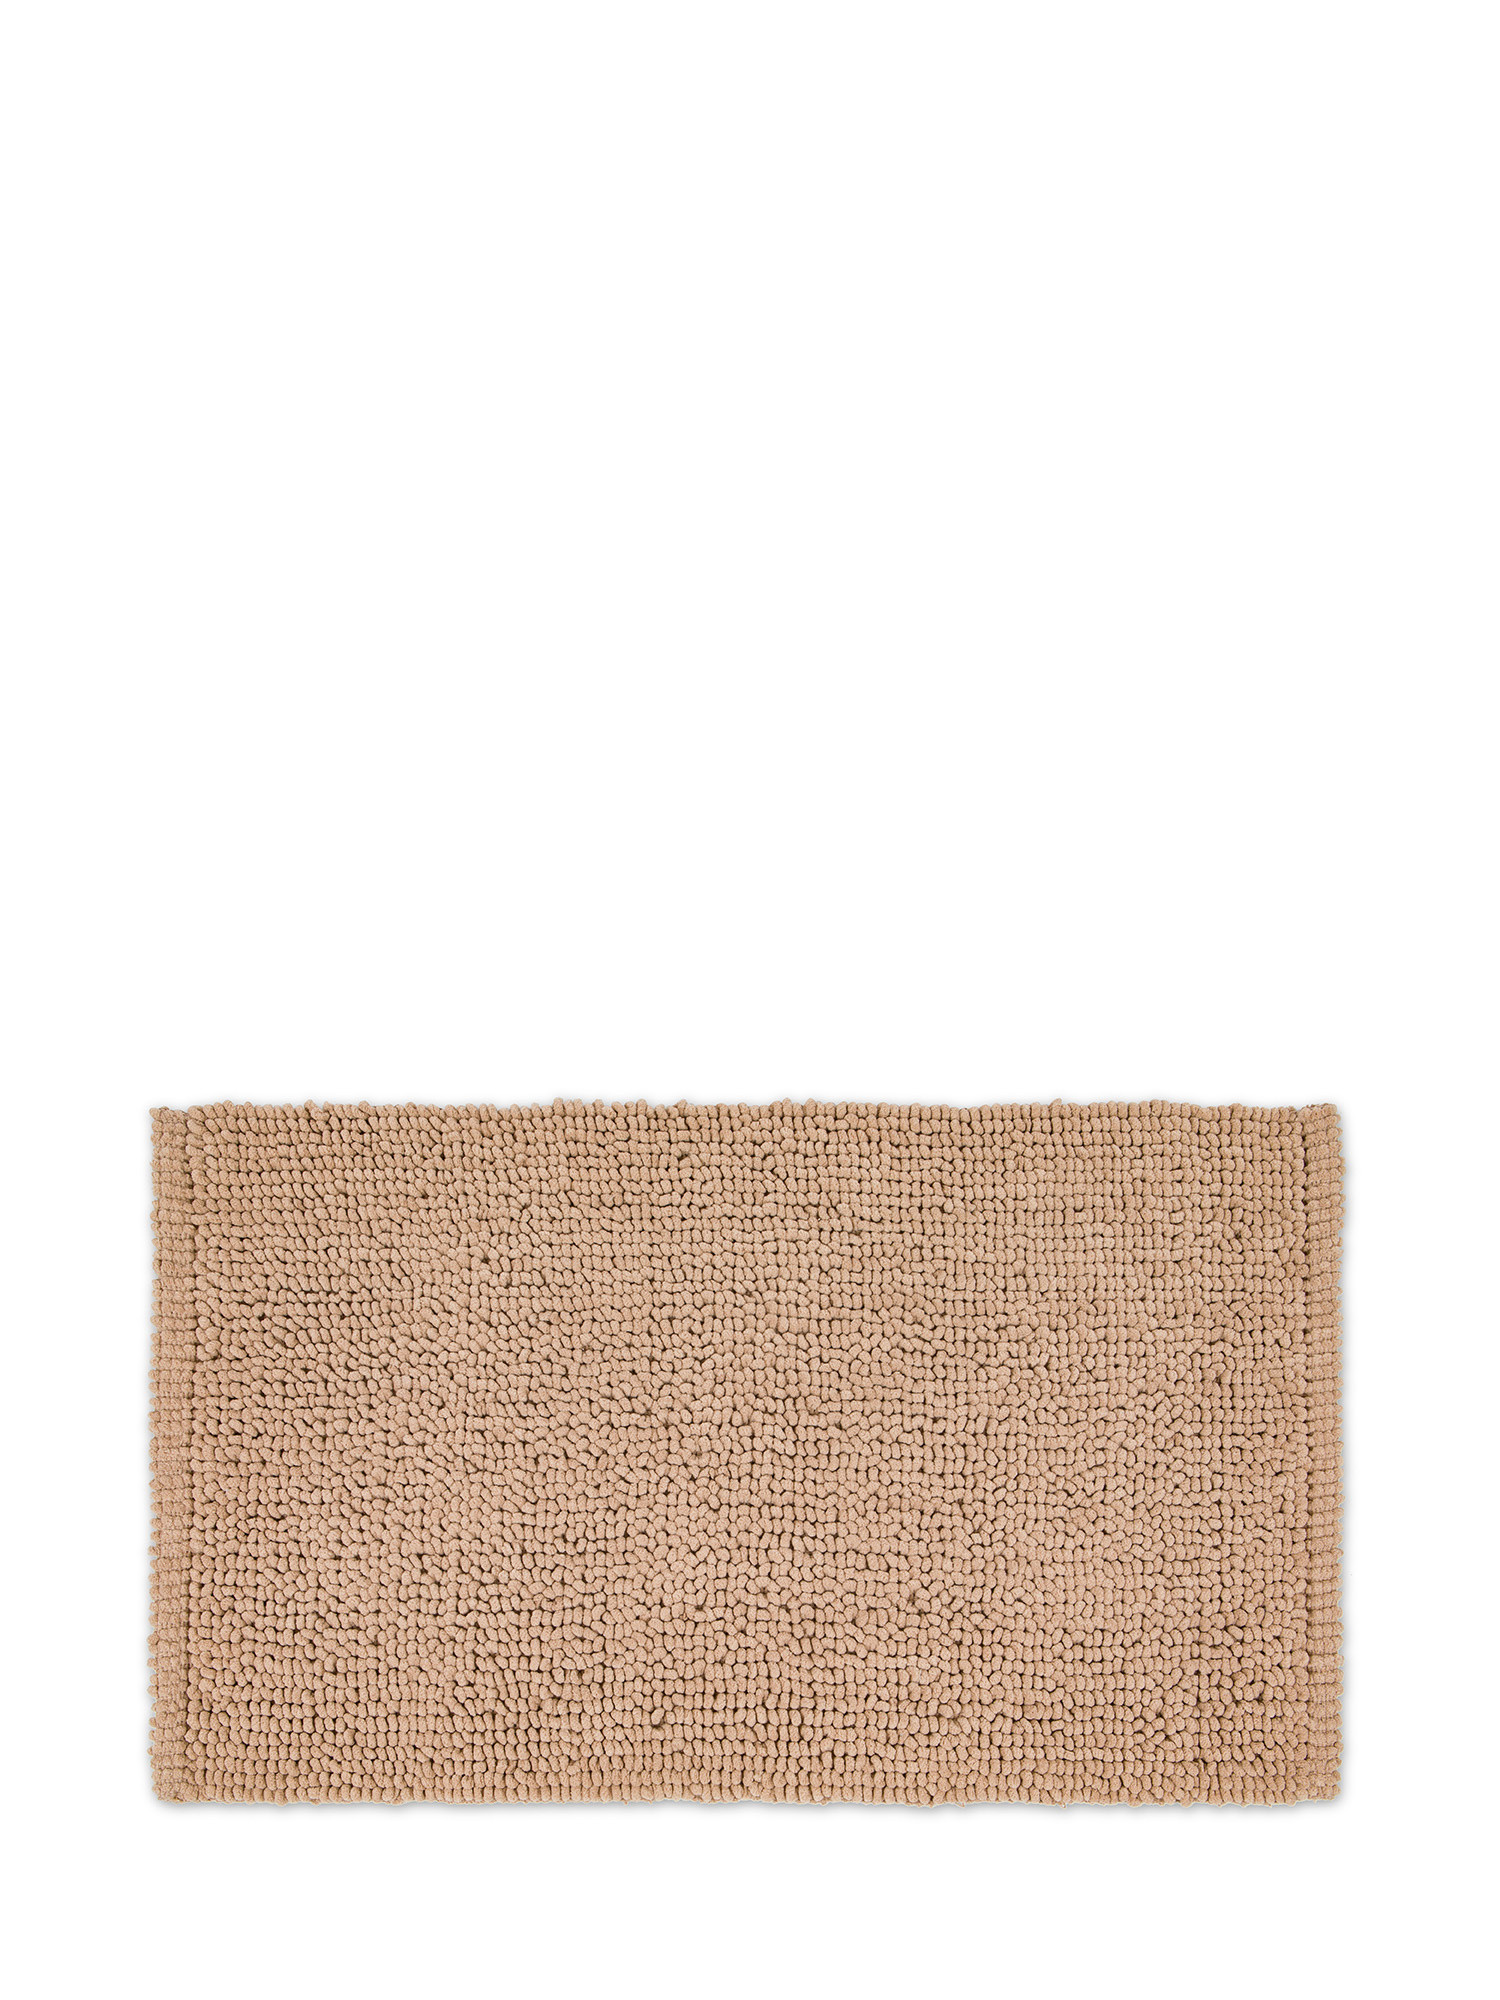 Tappeto bagno in ciniglia effetto shaggy, Beige, large image number 0